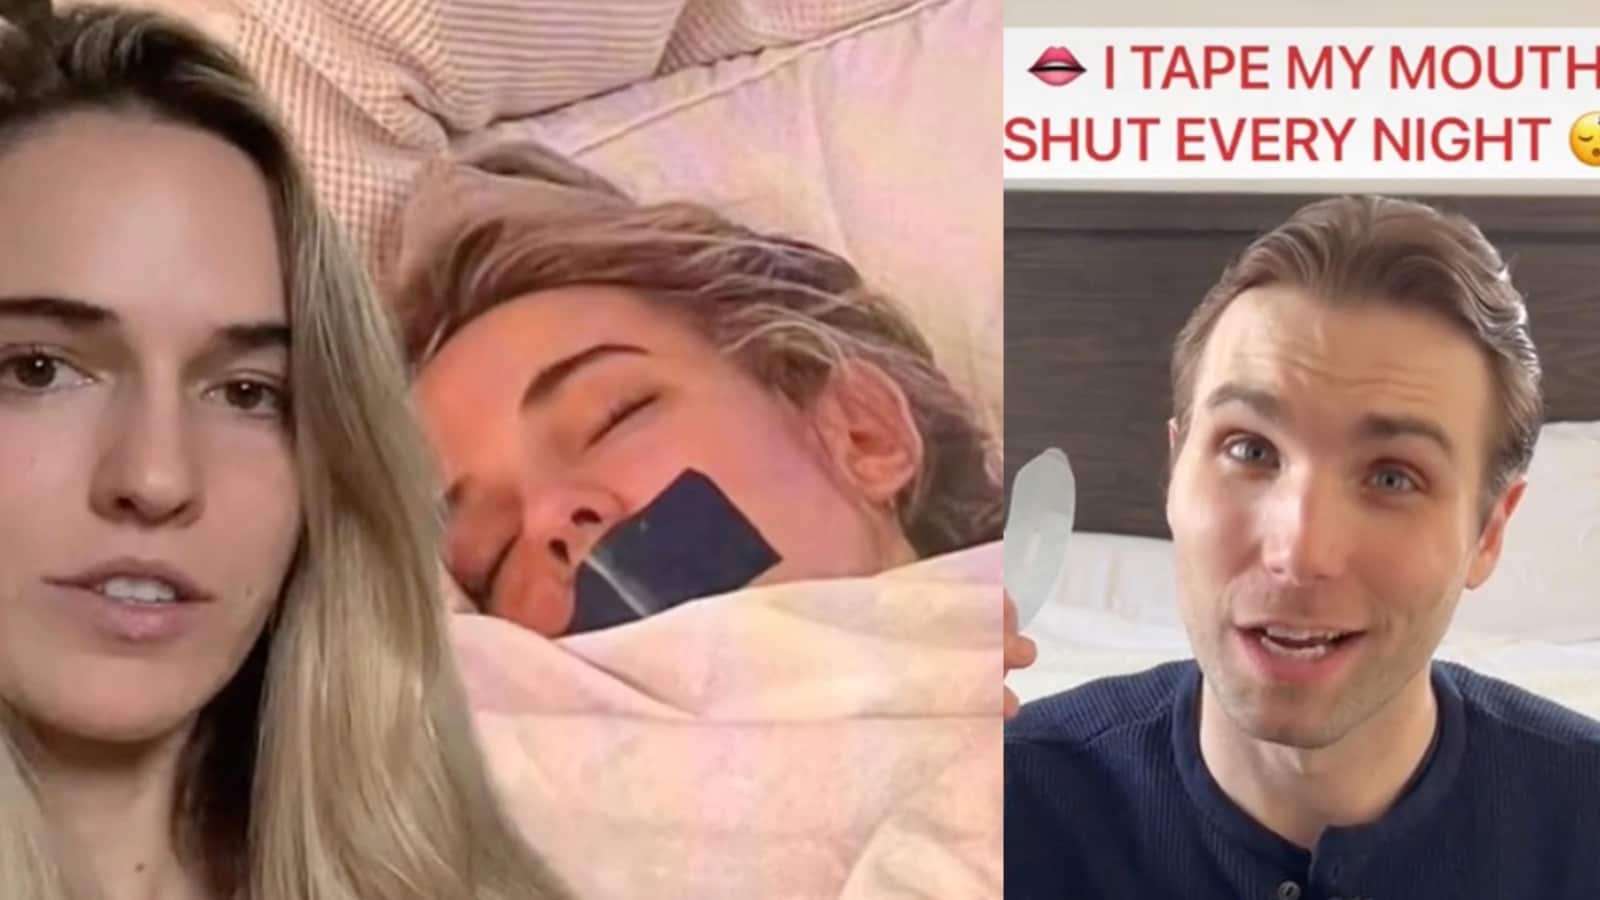 Everything You Need To Know About Viral ‘Mouth Taping’ TikTok Trend